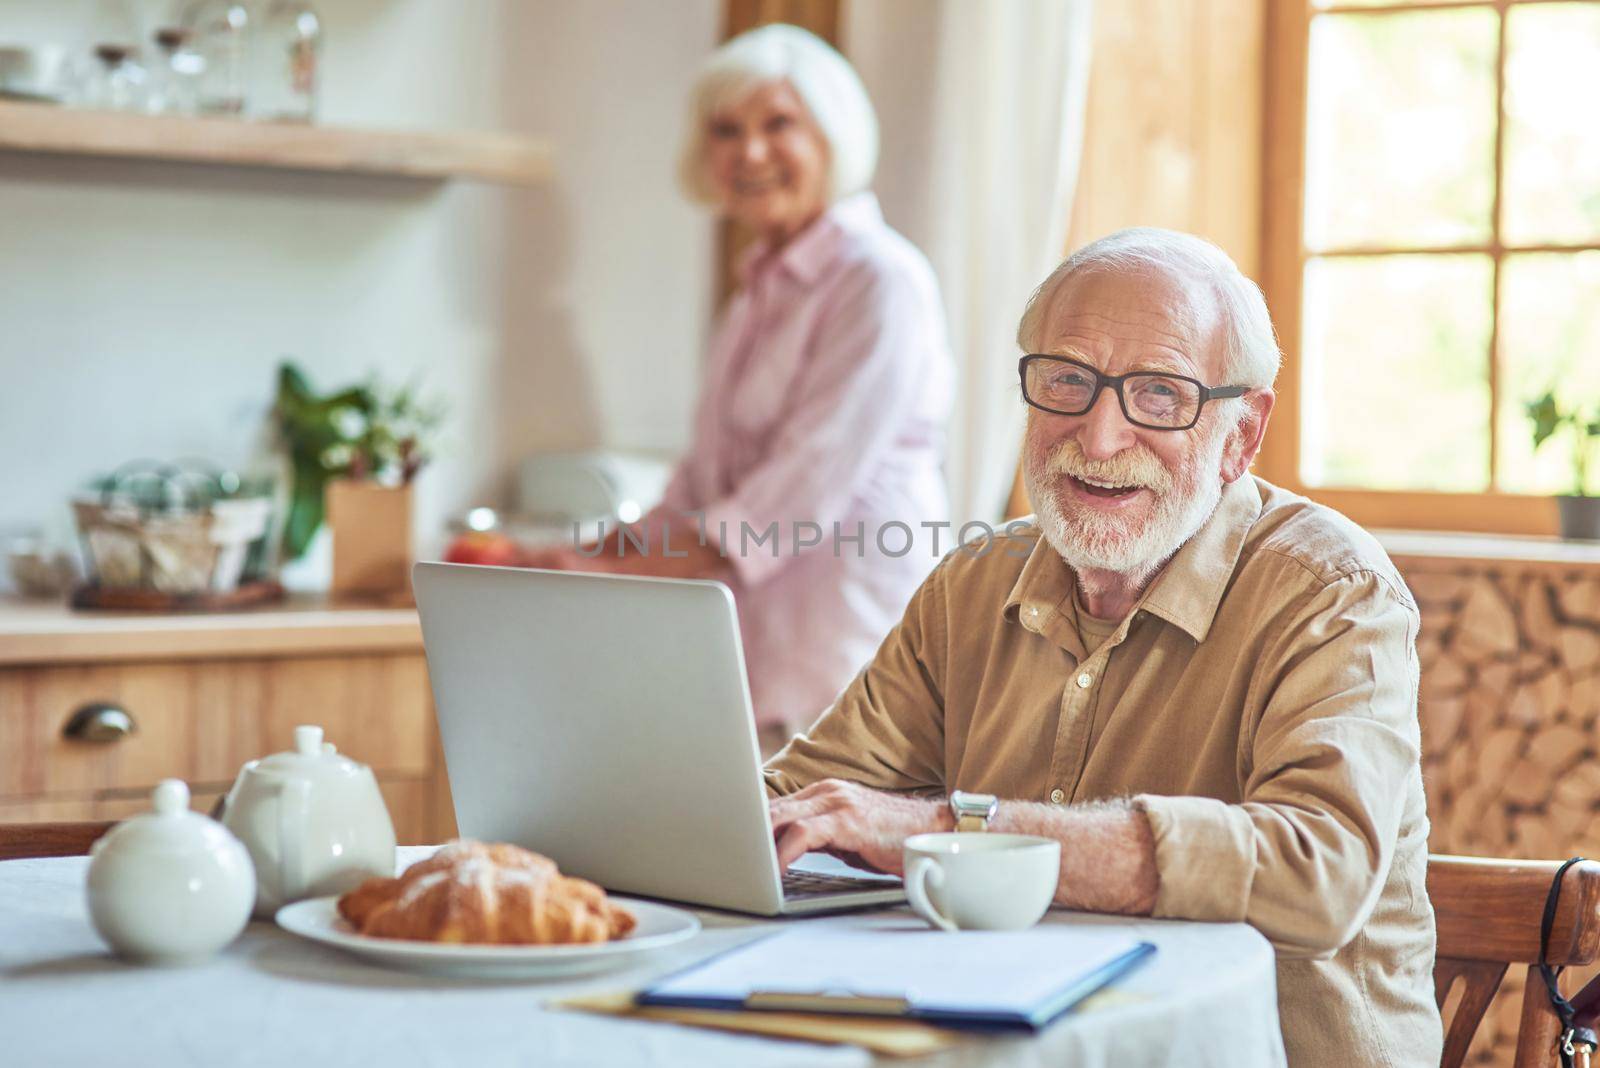 Happy senior man working on laptop while his wife cooking breakfast in the background. Domestic lifestyle concept